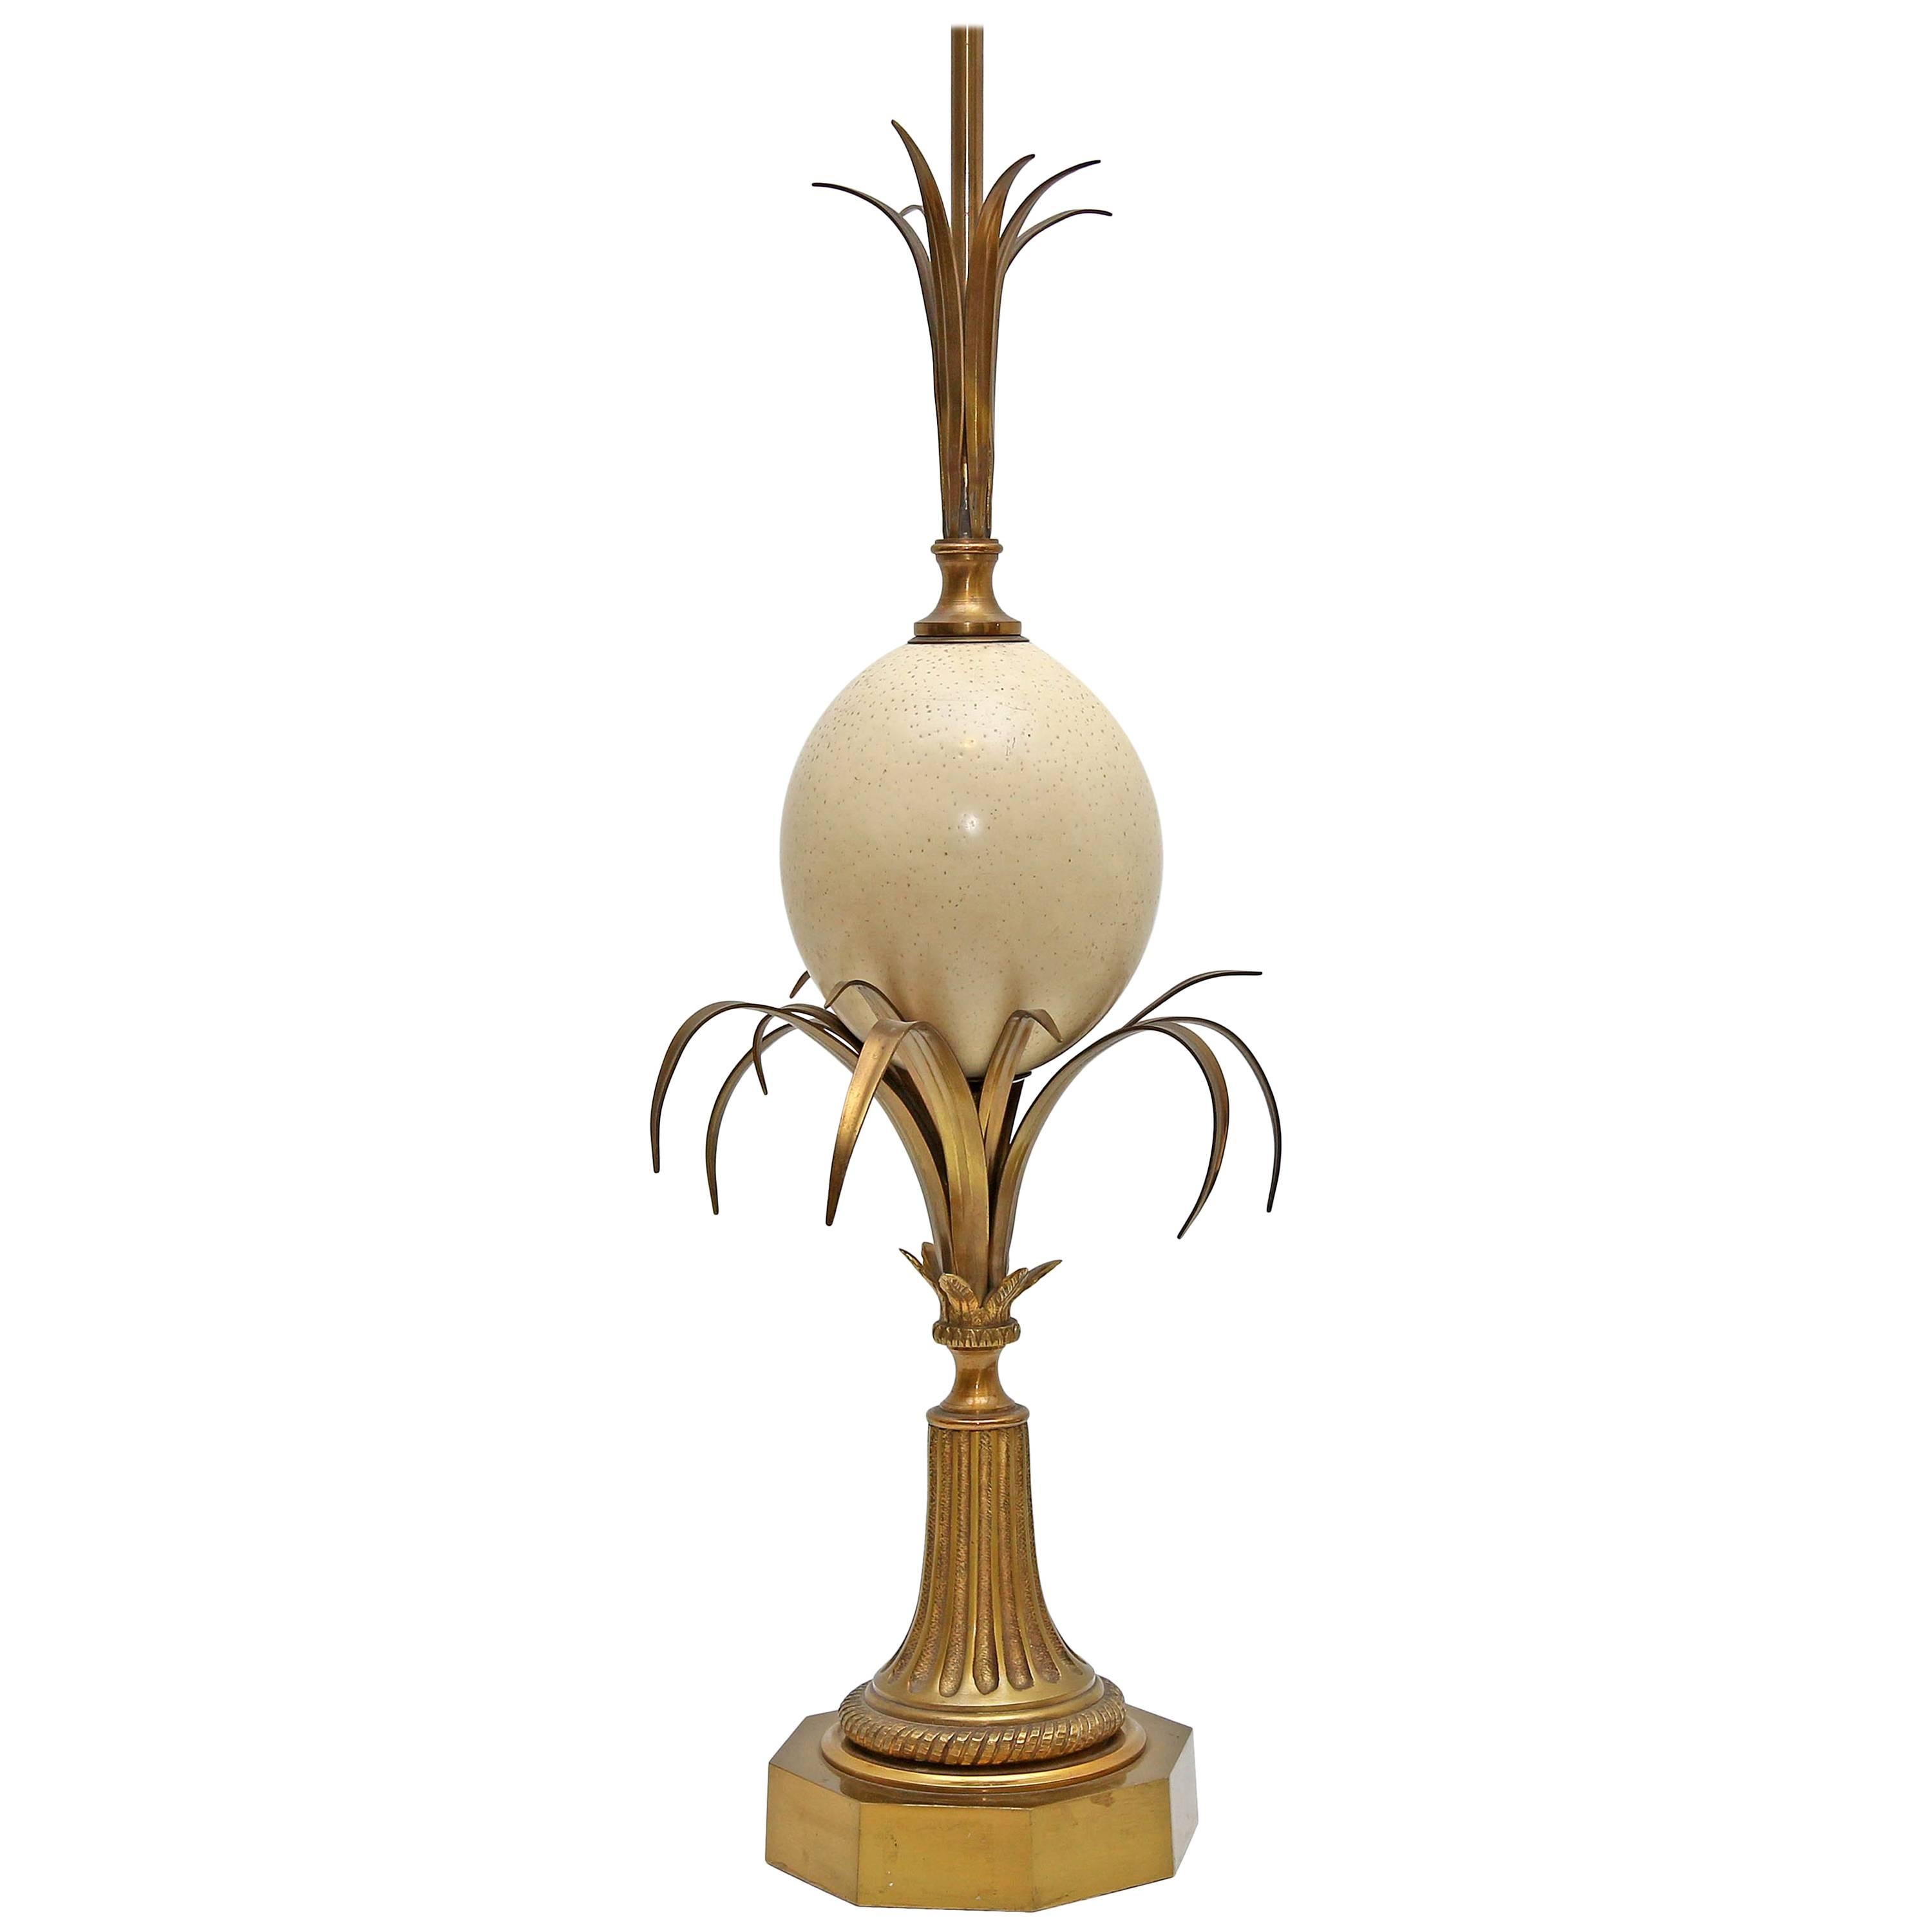 Hollywood Regency brass and ostrich eggshell lamp by Maison Charles, Paris.